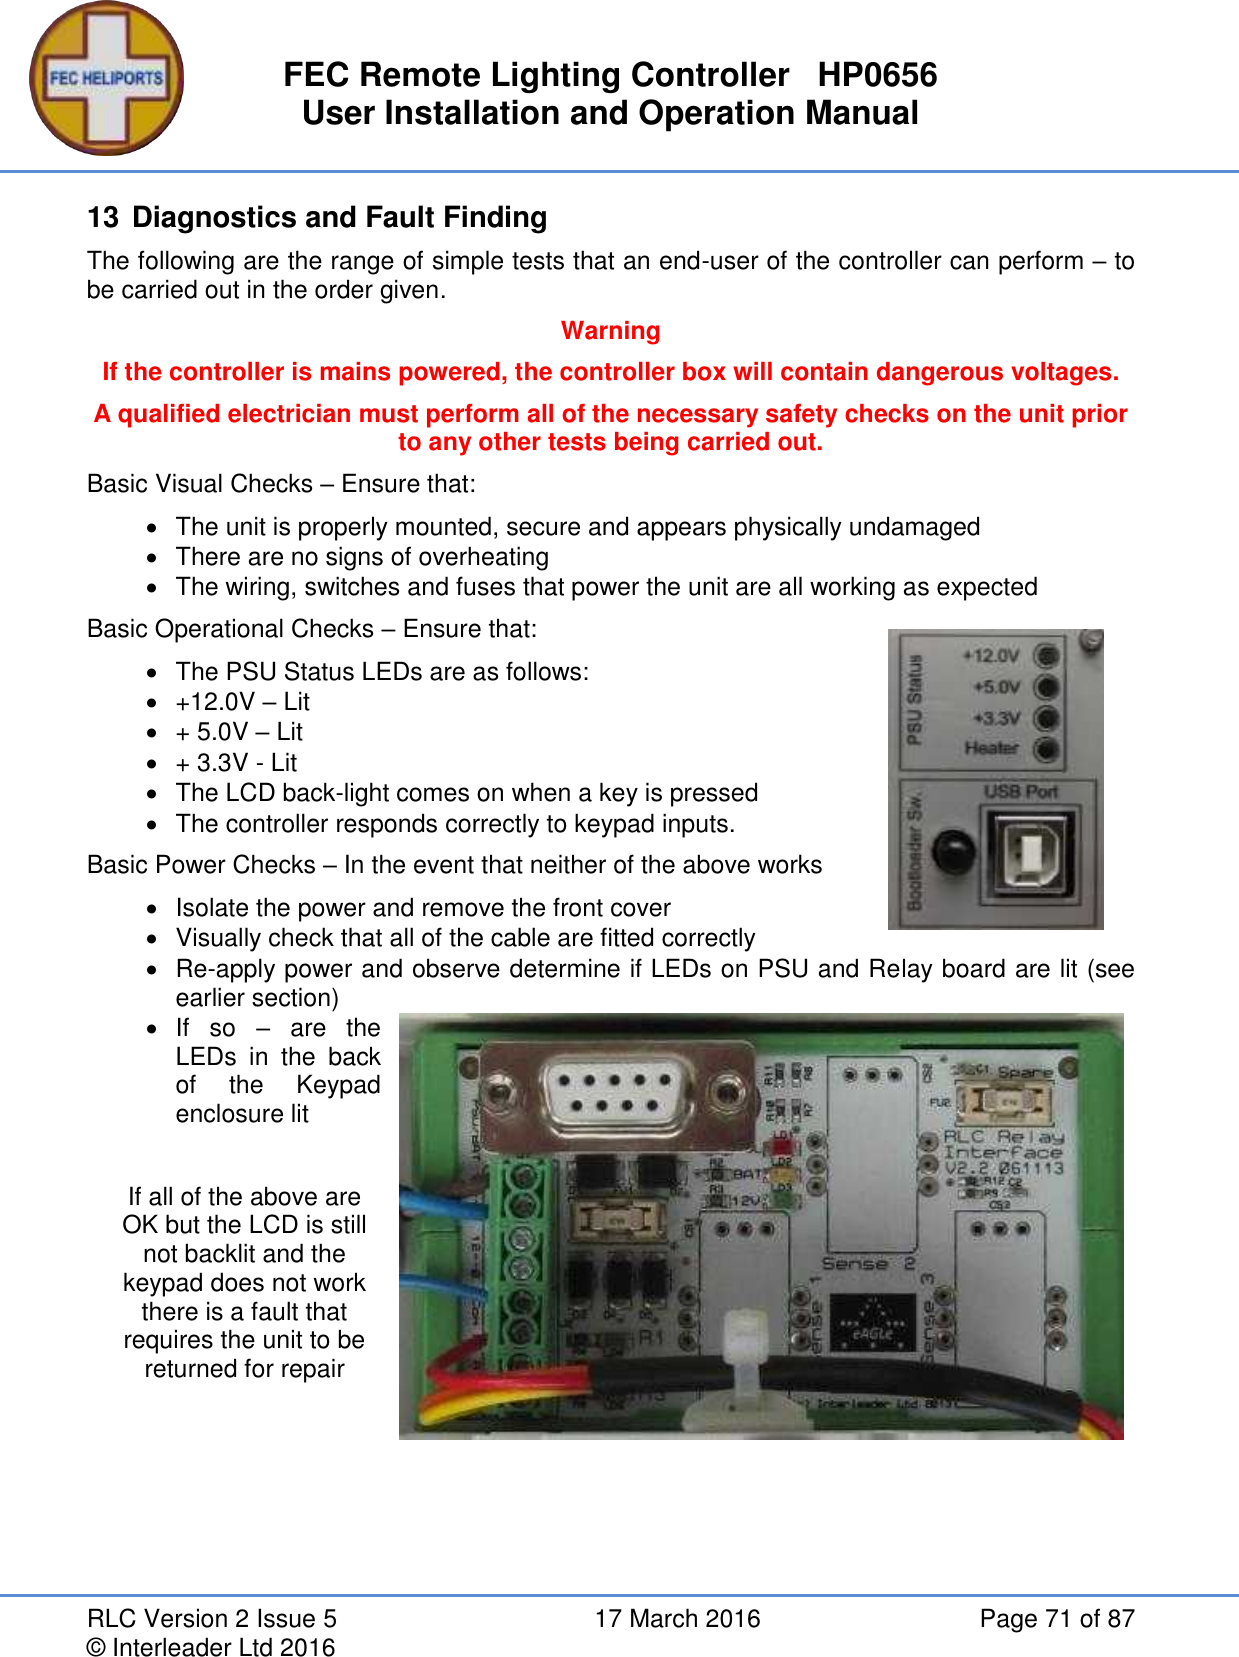 FEC Remote Lighting Controller   HP0656 User Installation and Operation Manual RLC Version 2 Issue 5  17 March 2016  Page 71 of 87 © Interleader Ltd 2016 13 Diagnostics and Fault Finding The following are the range of simple tests that an end-user of the controller can perform – to be carried out in the order given. Warning If the controller is mains powered, the controller box will contain dangerous voltages. A qualified electrician must perform all of the necessary safety checks on the unit prior to any other tests being carried out. Basic Visual Checks – Ensure that:   The unit is properly mounted, secure and appears physically undamaged  There are no signs of overheating   The wiring, switches and fuses that power the unit are all working as expected Basic Operational Checks – Ensure that:   The PSU Status LEDs are as follows:   +12.0V – Lit   + 5.0V – Lit   + 3.3V - Lit   The LCD back-light comes on when a key is pressed   The controller responds correctly to keypad inputs. Basic Power Checks – In the event that neither of the above works   Isolate the power and remove the front cover   Visually check that all of the cable are fitted correctly  Re-apply power and observe determine if LEDs on PSU and Relay board are lit (see earlier section)   If  so  –  are  the LEDs  in  the  back of  the  Keypad enclosure lit  If all of the above are OK but the LCD is still not backlit and the keypad does not work there is a fault that requires the unit to be returned for repair        